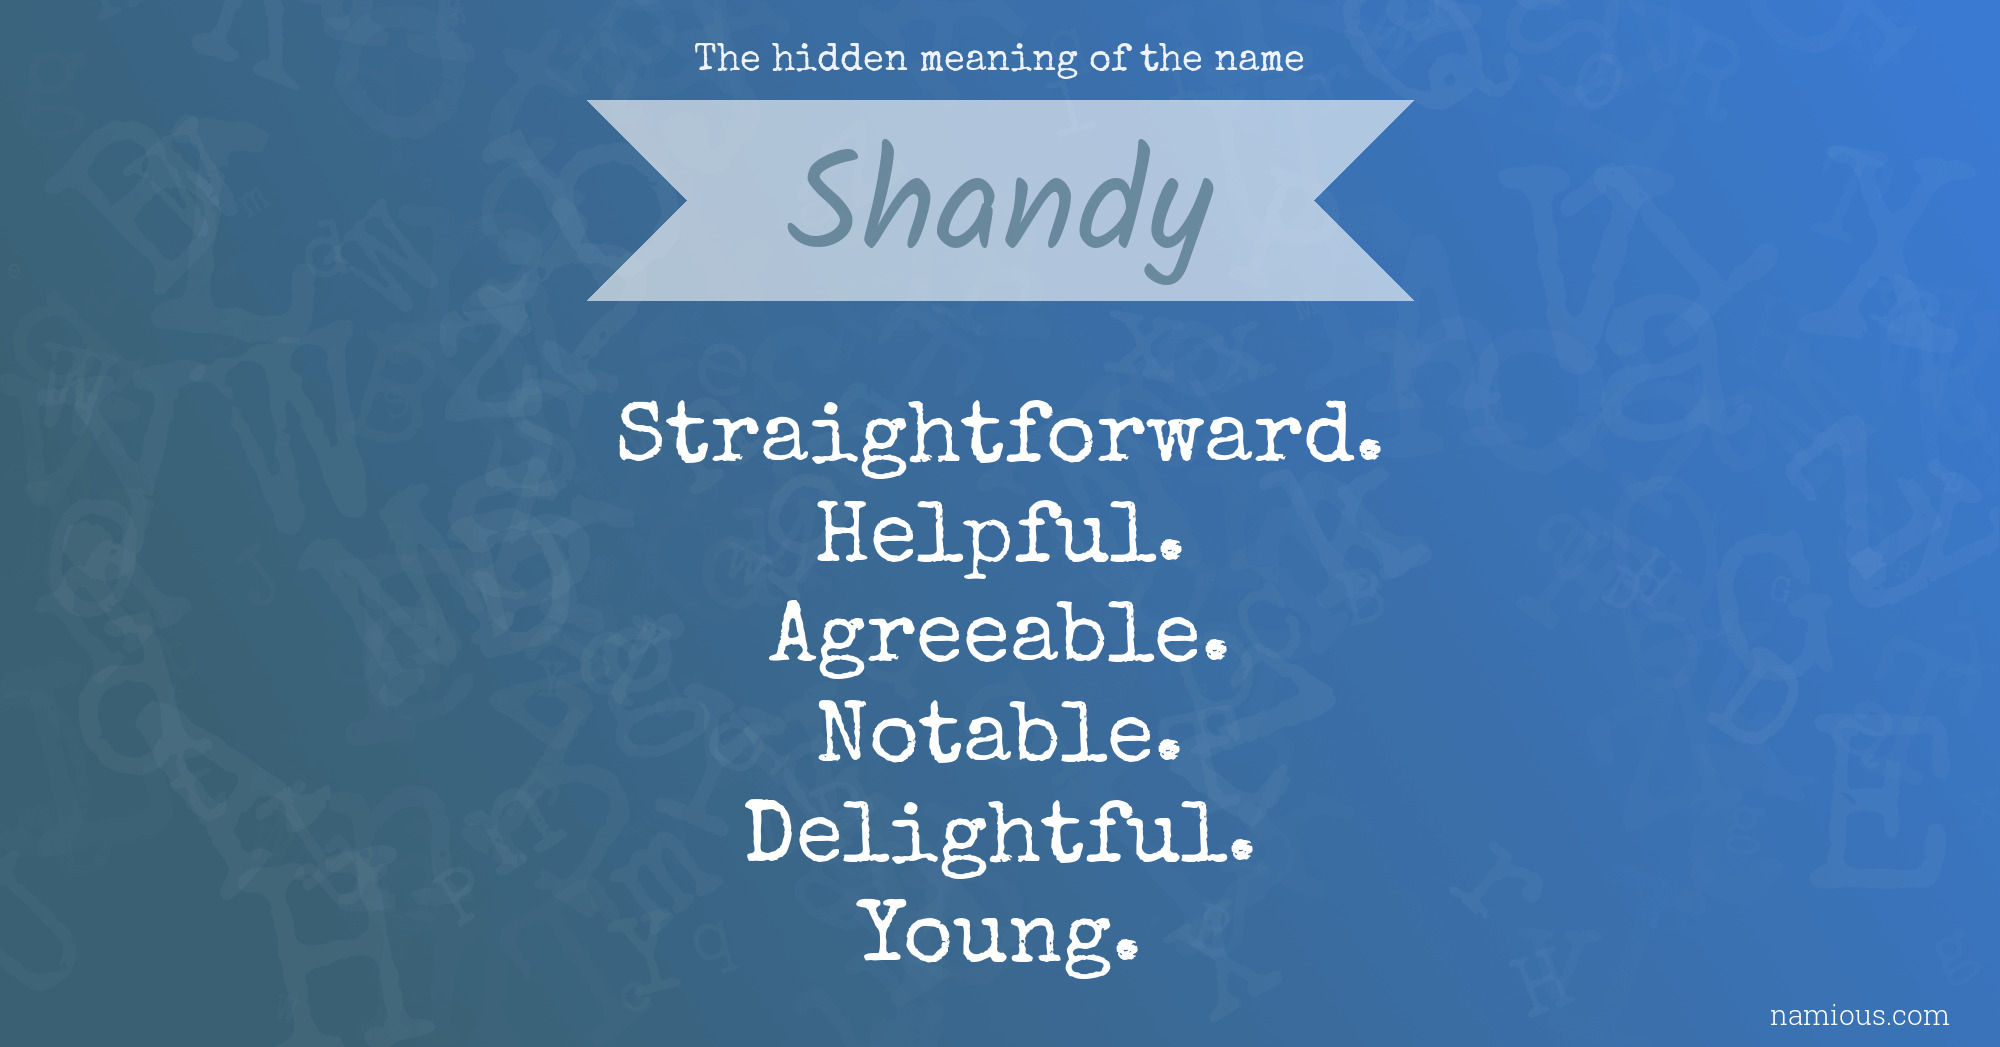 The hidden meaning of the name Shandy